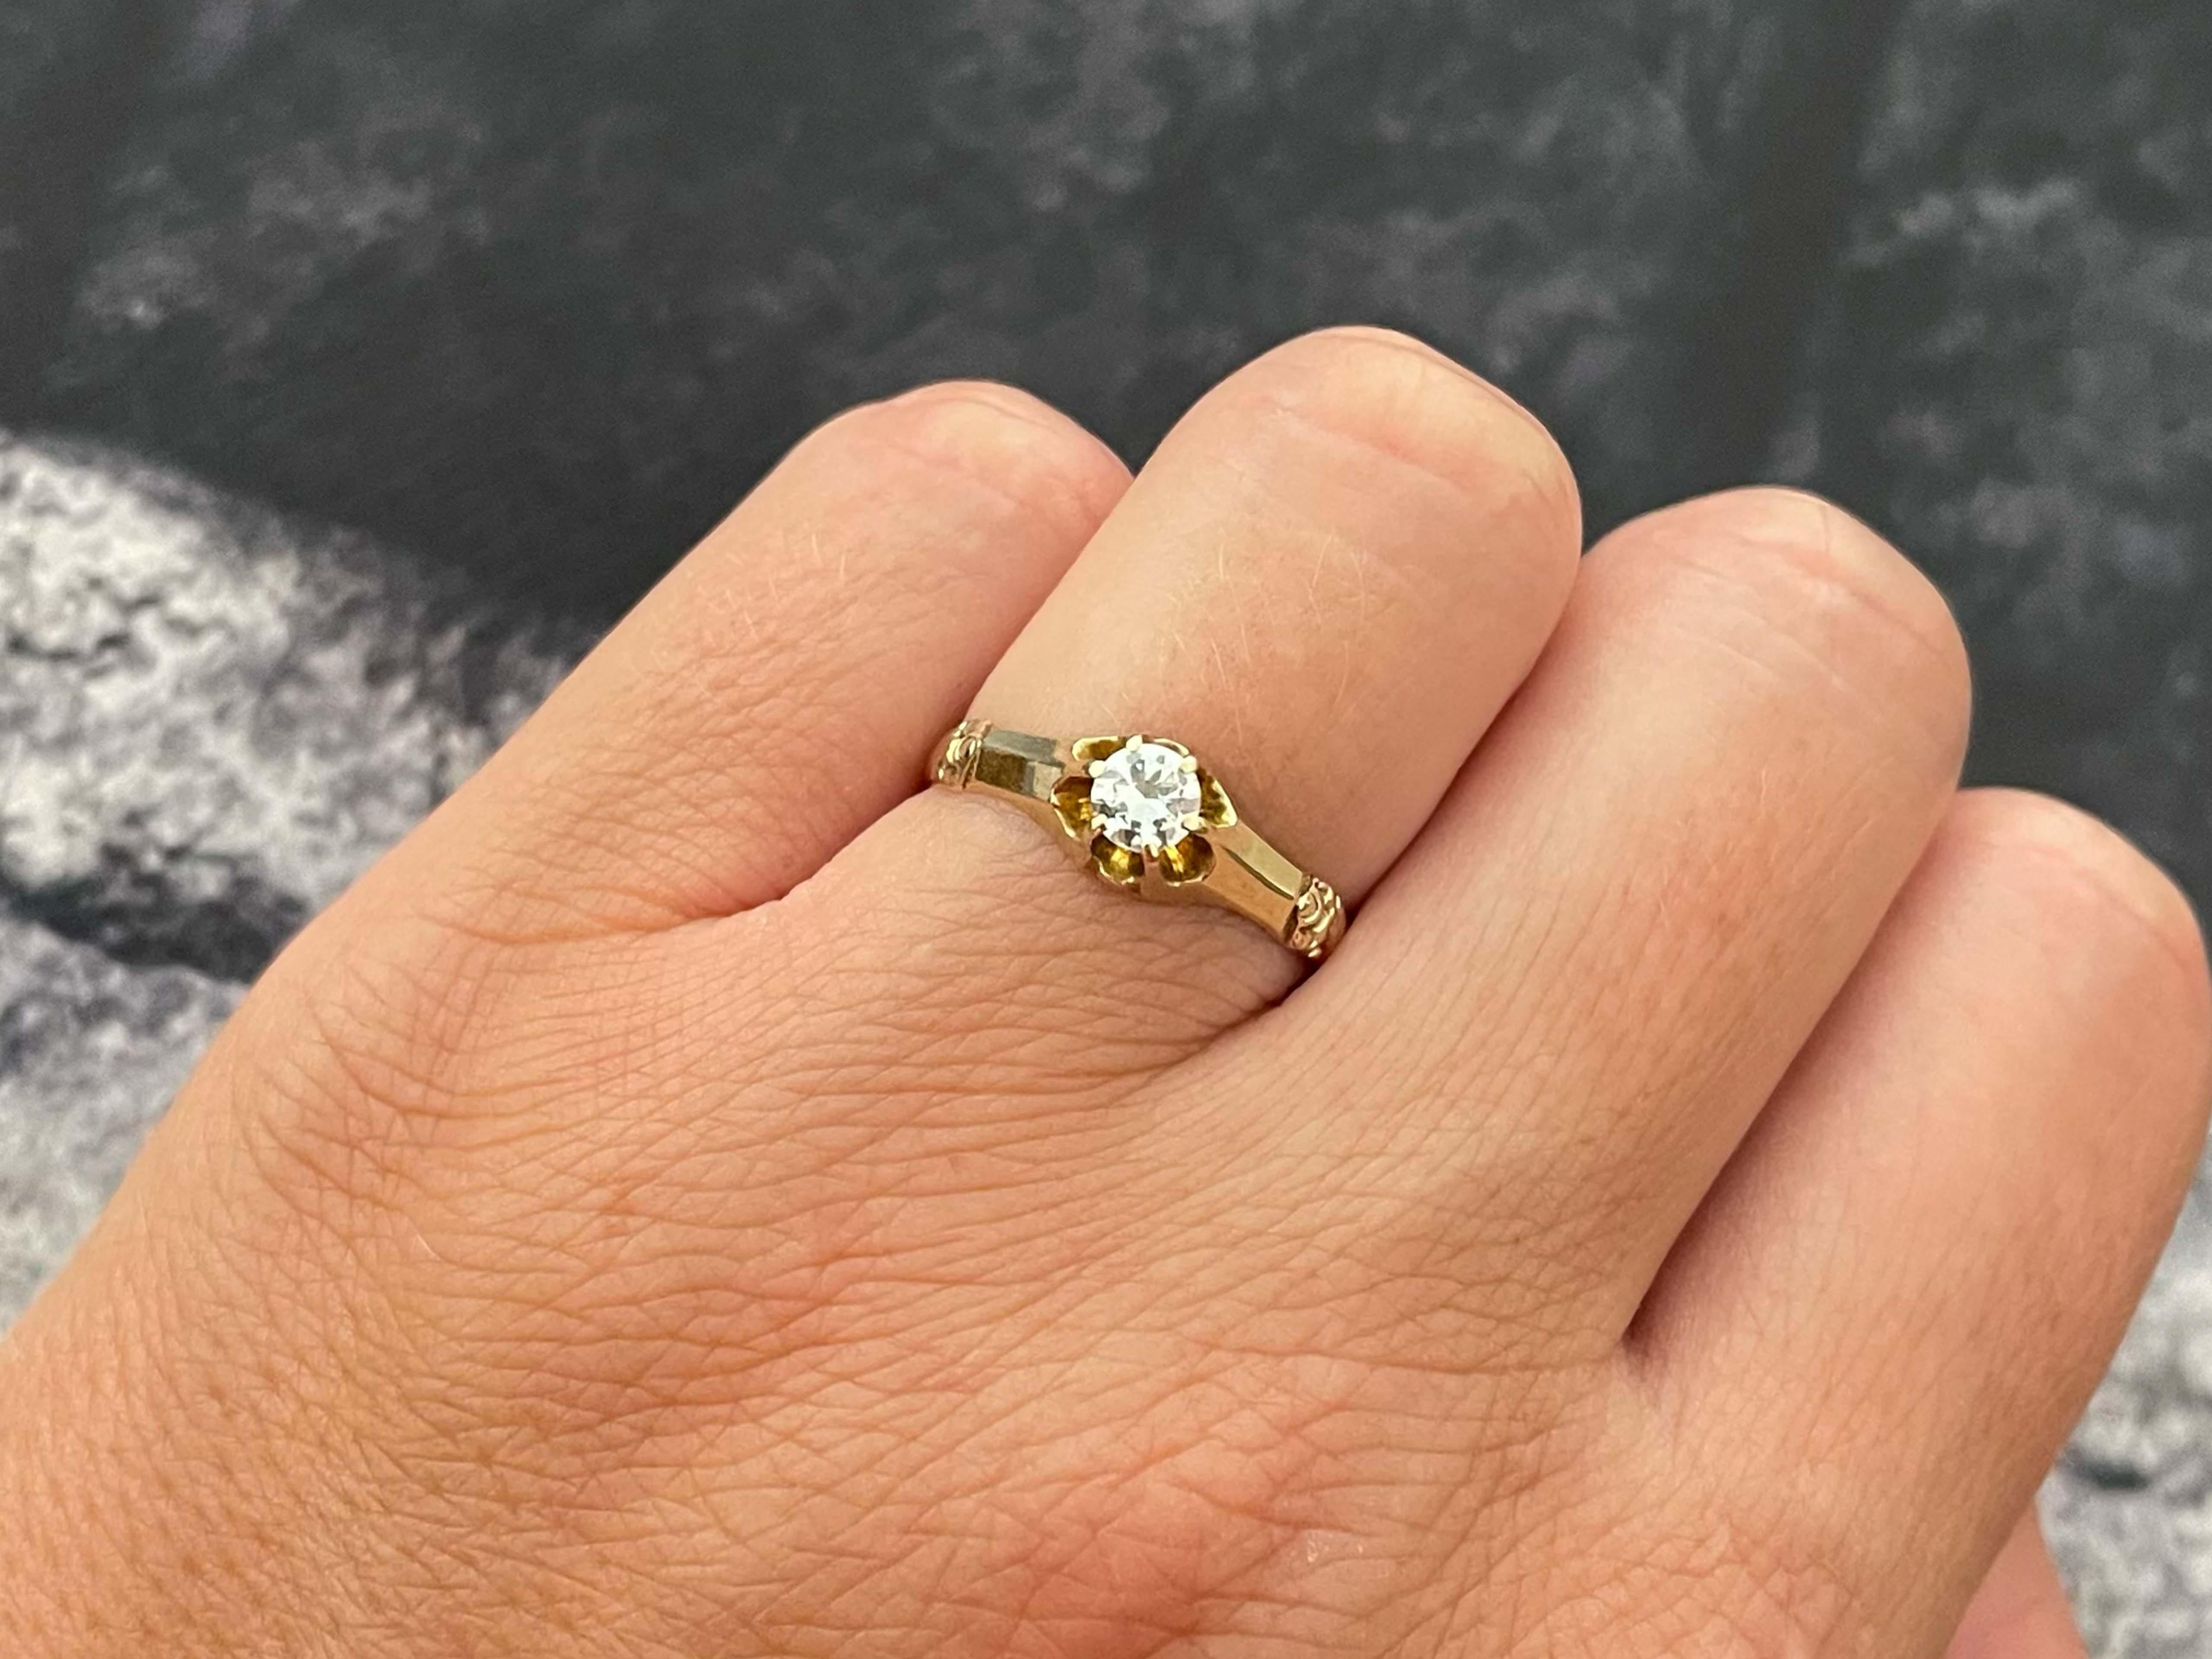 Item Specifications:

Metal: 14k Yellow Gold

Style: Statement Ring

Ring Size: 7.75 (resizing available for a fee)

Total Weight: 1.9 Grams

Gemstone Specifications: 1 Diamond

Diamond Carat Weight: 0.26 carats

Diamond Color: G

Diamond Clarity: